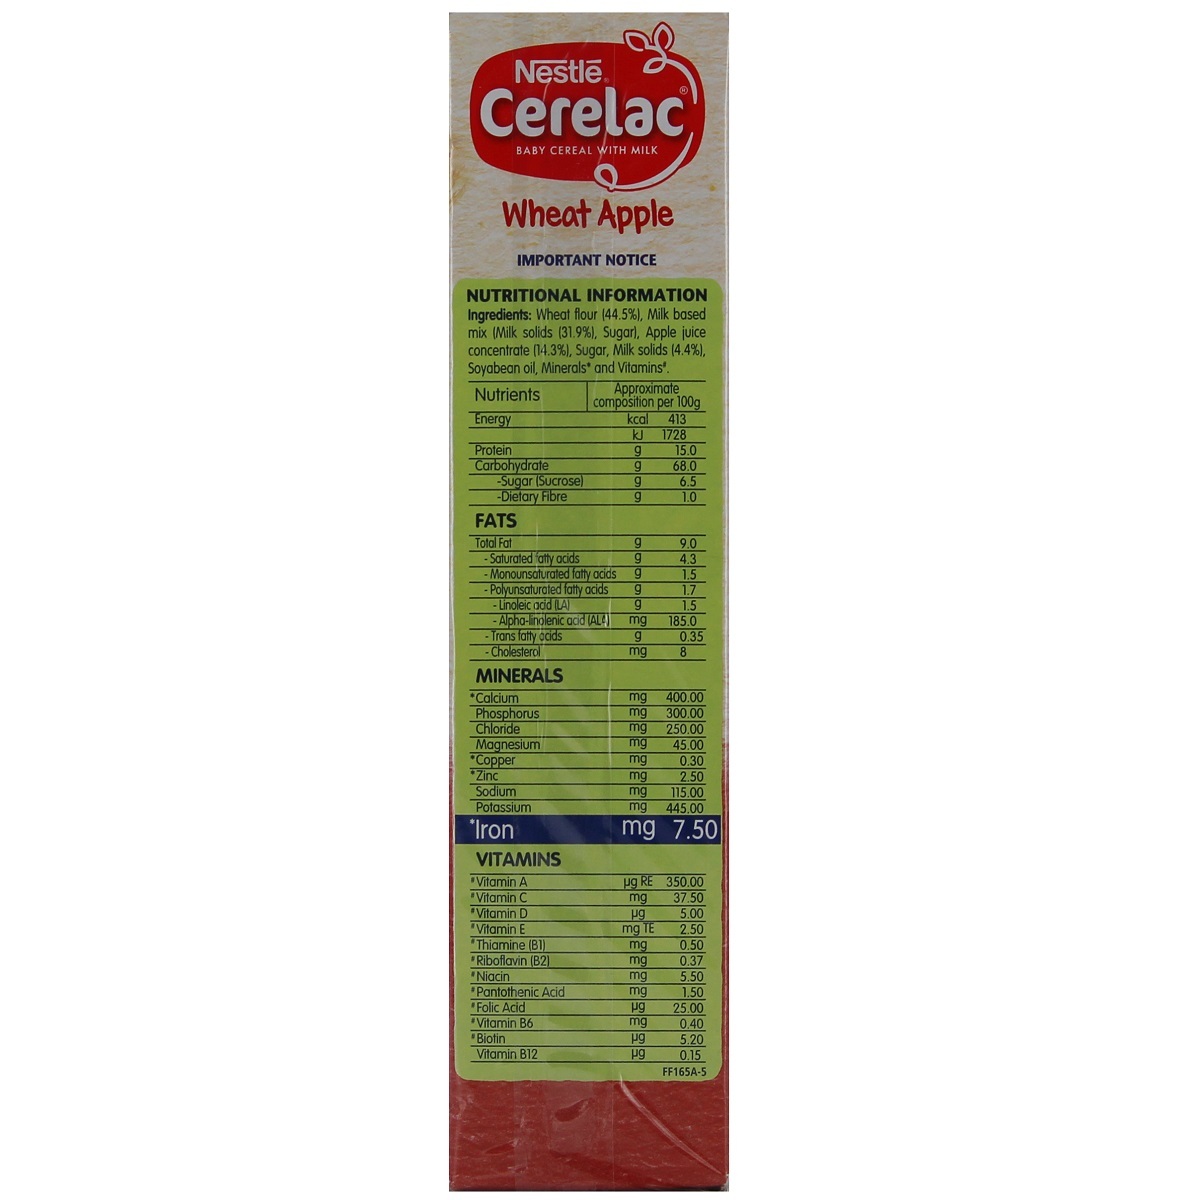 Cerelac Wheat Apple Stage 1 300g